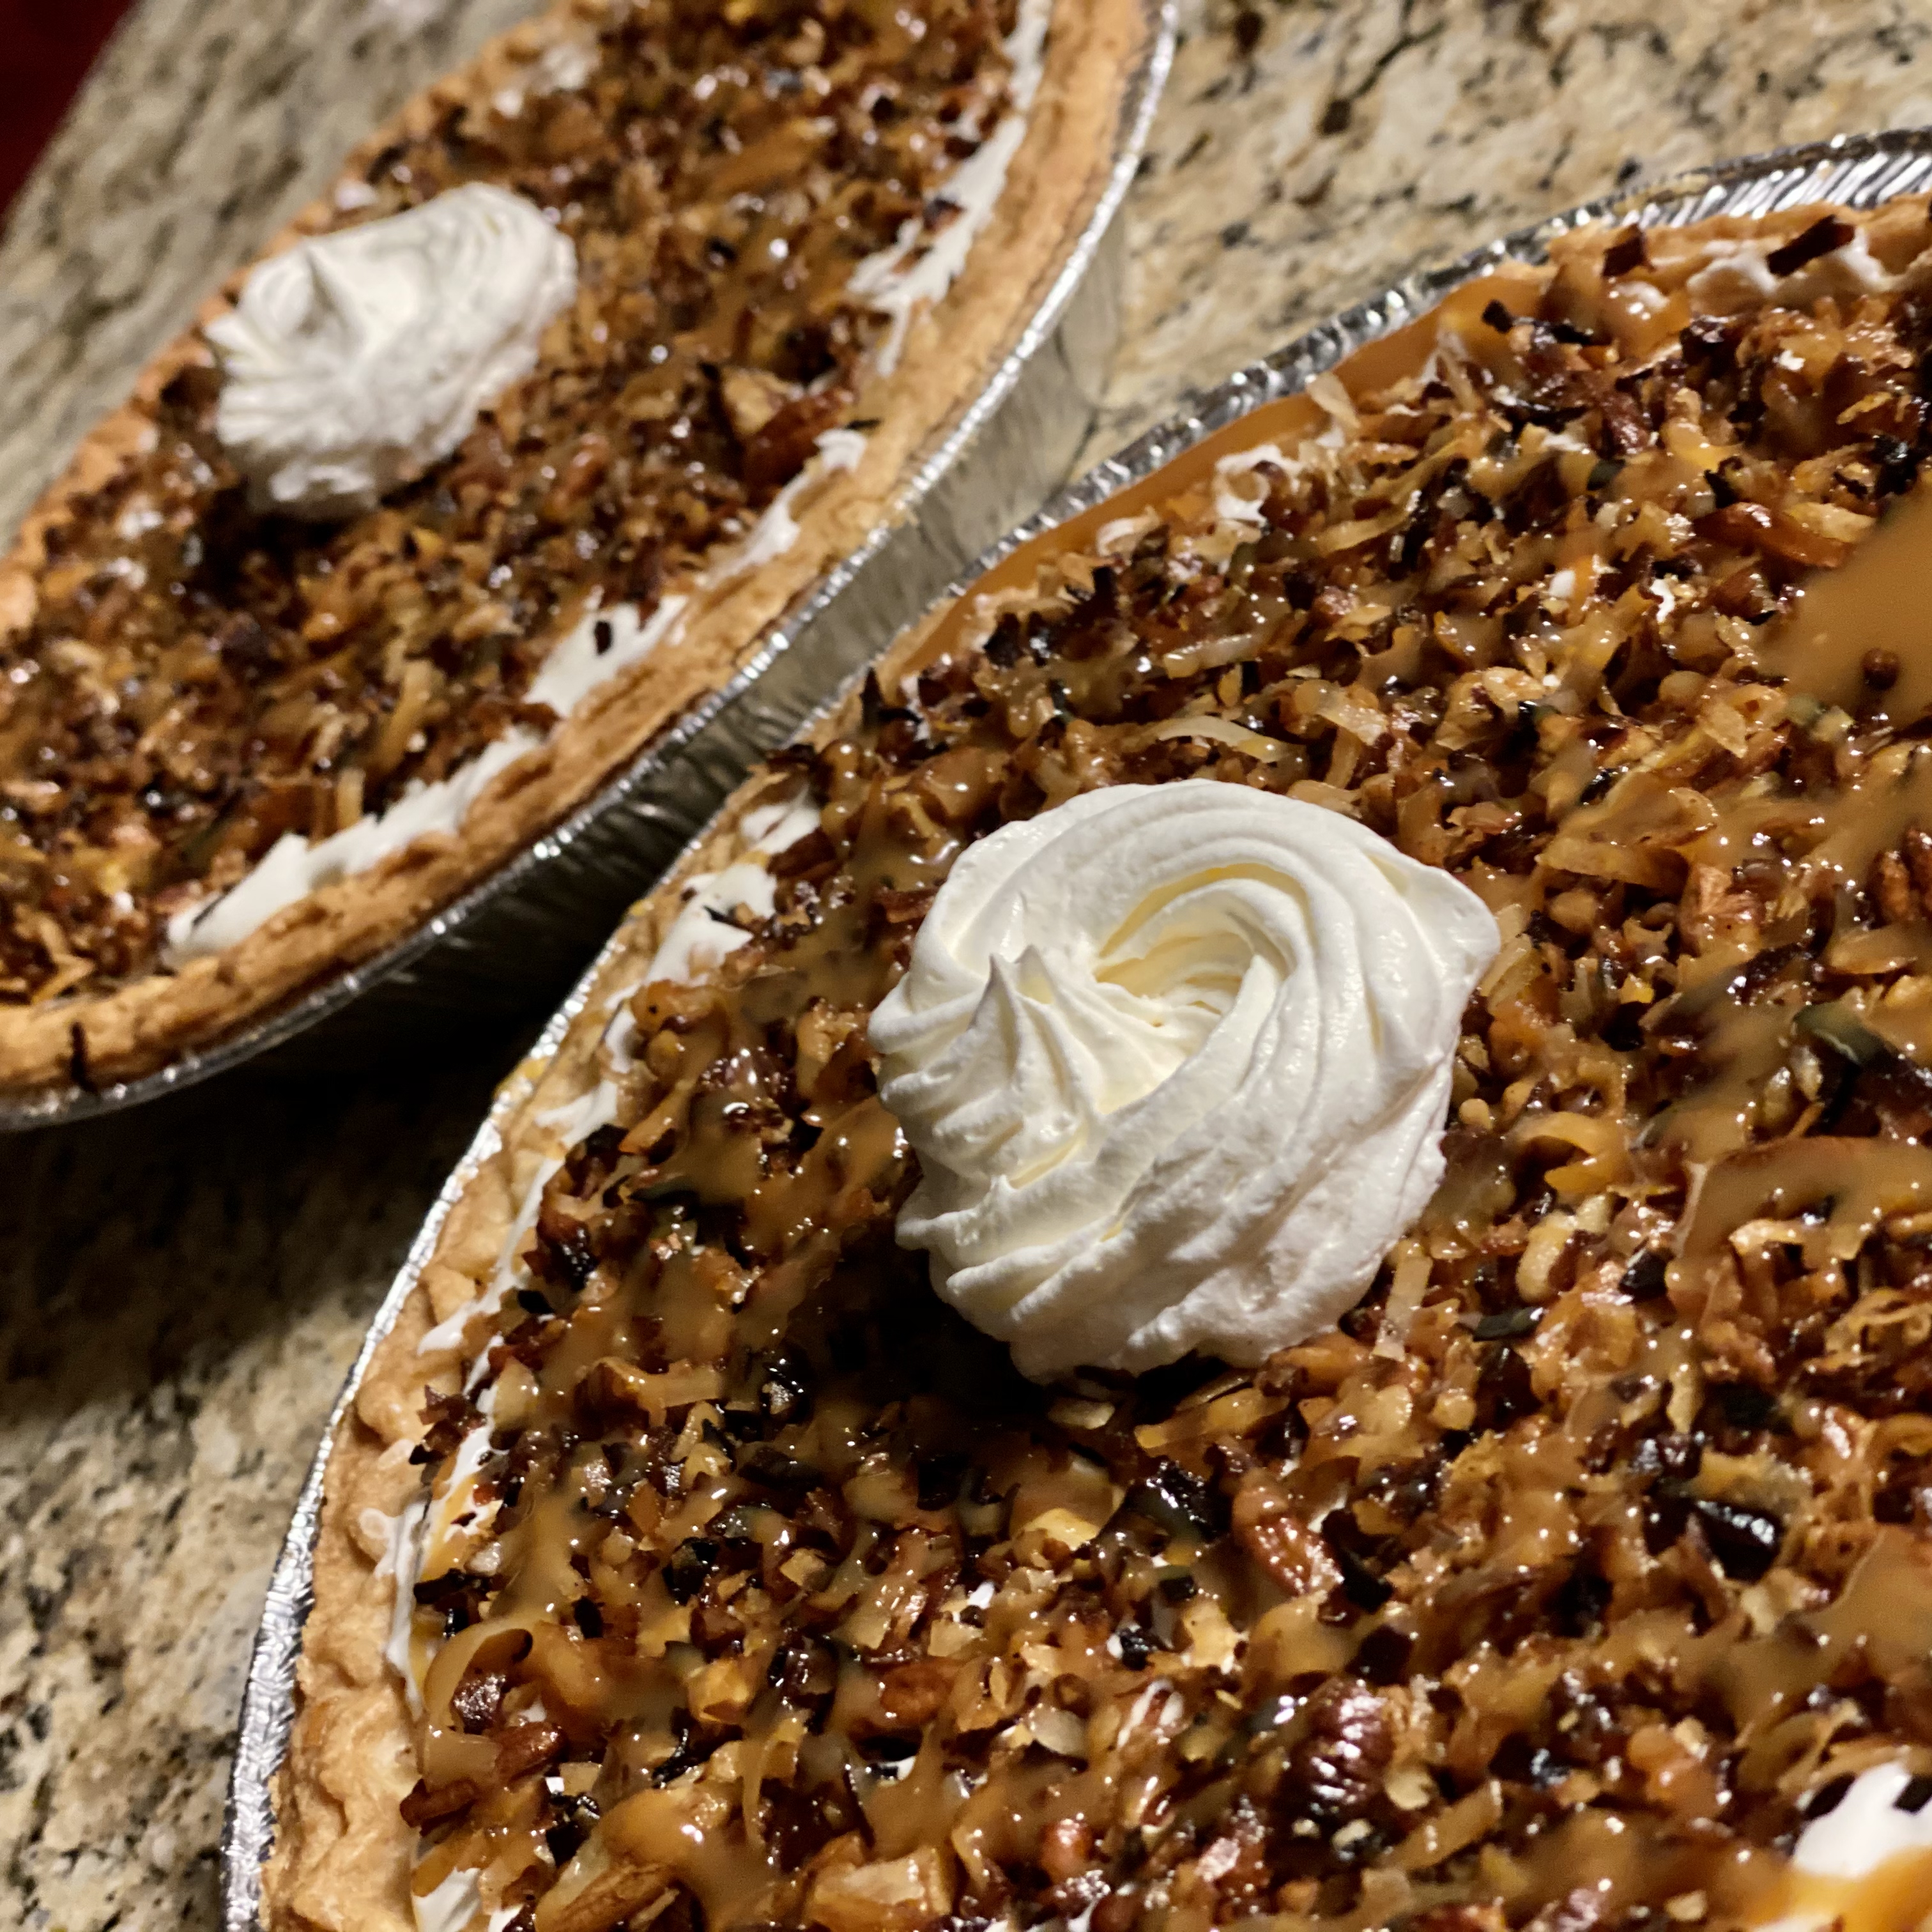 Toasted Coconut, Pecan, and Caramel Pie 